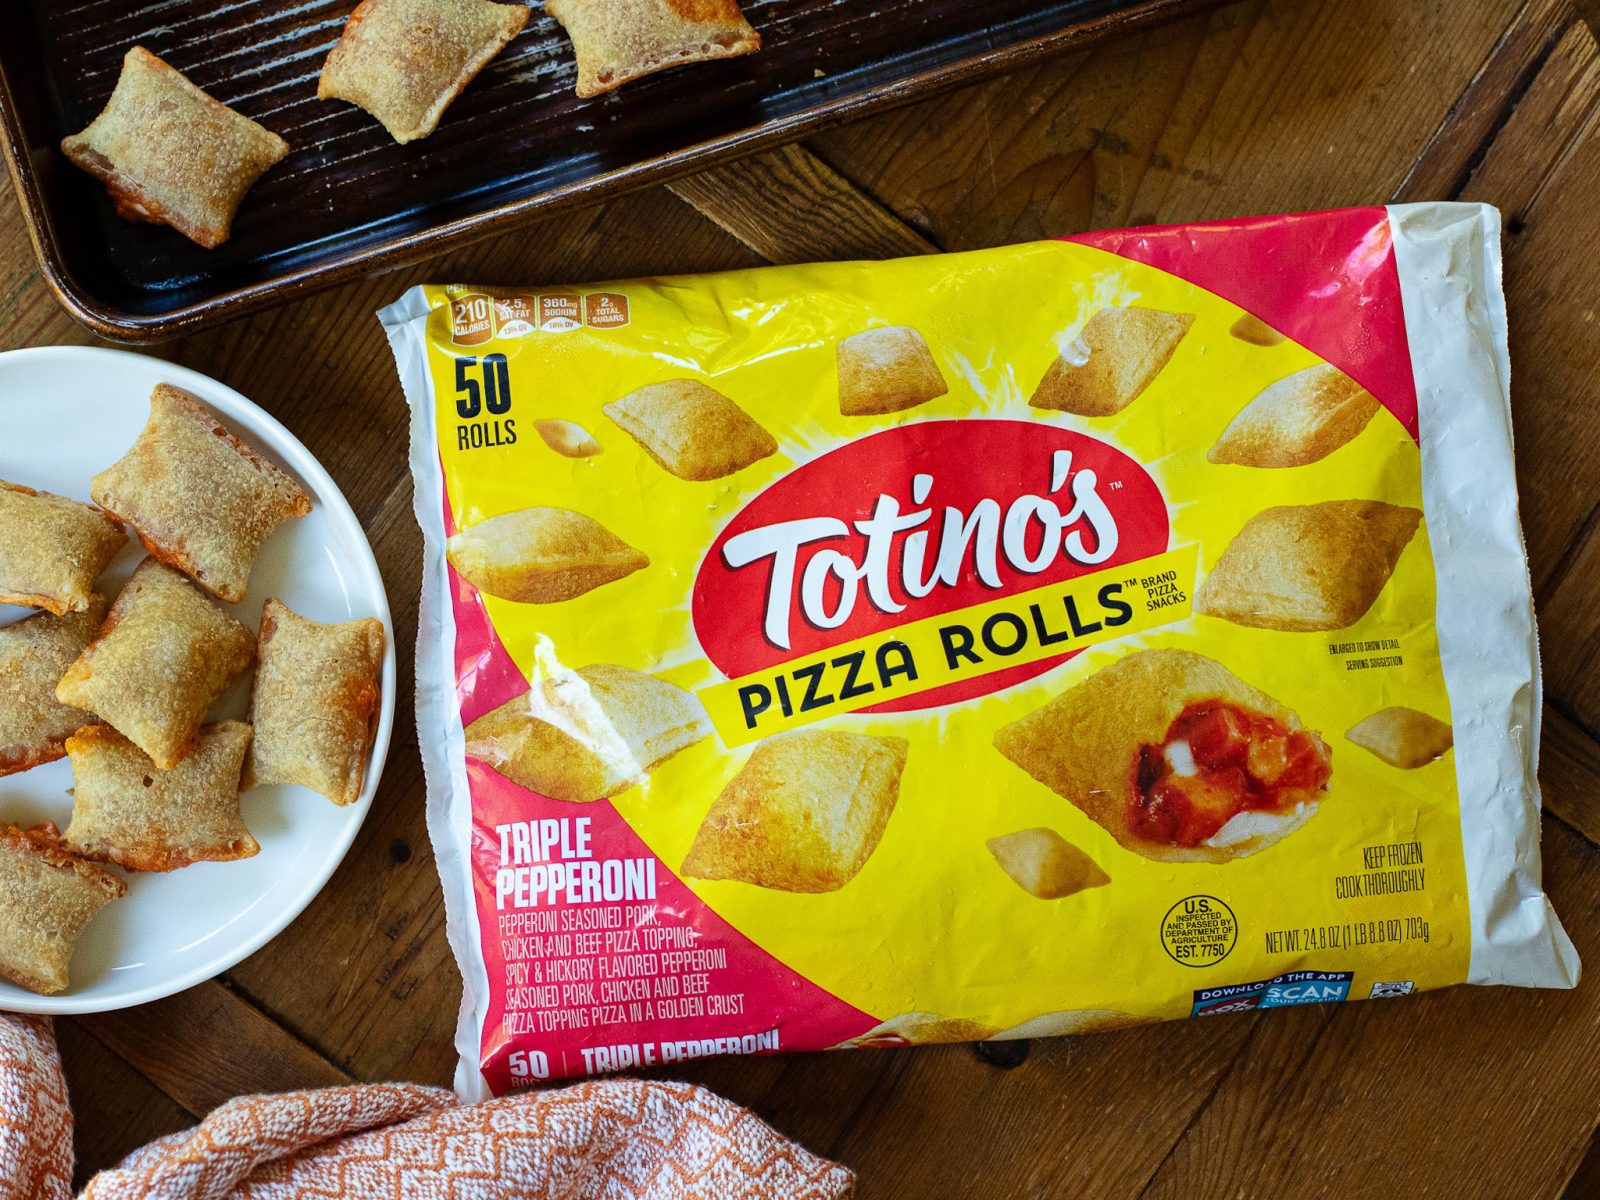 Get The Bags Of Totino’s Pizza Rolls For Just $2.46 At Publix